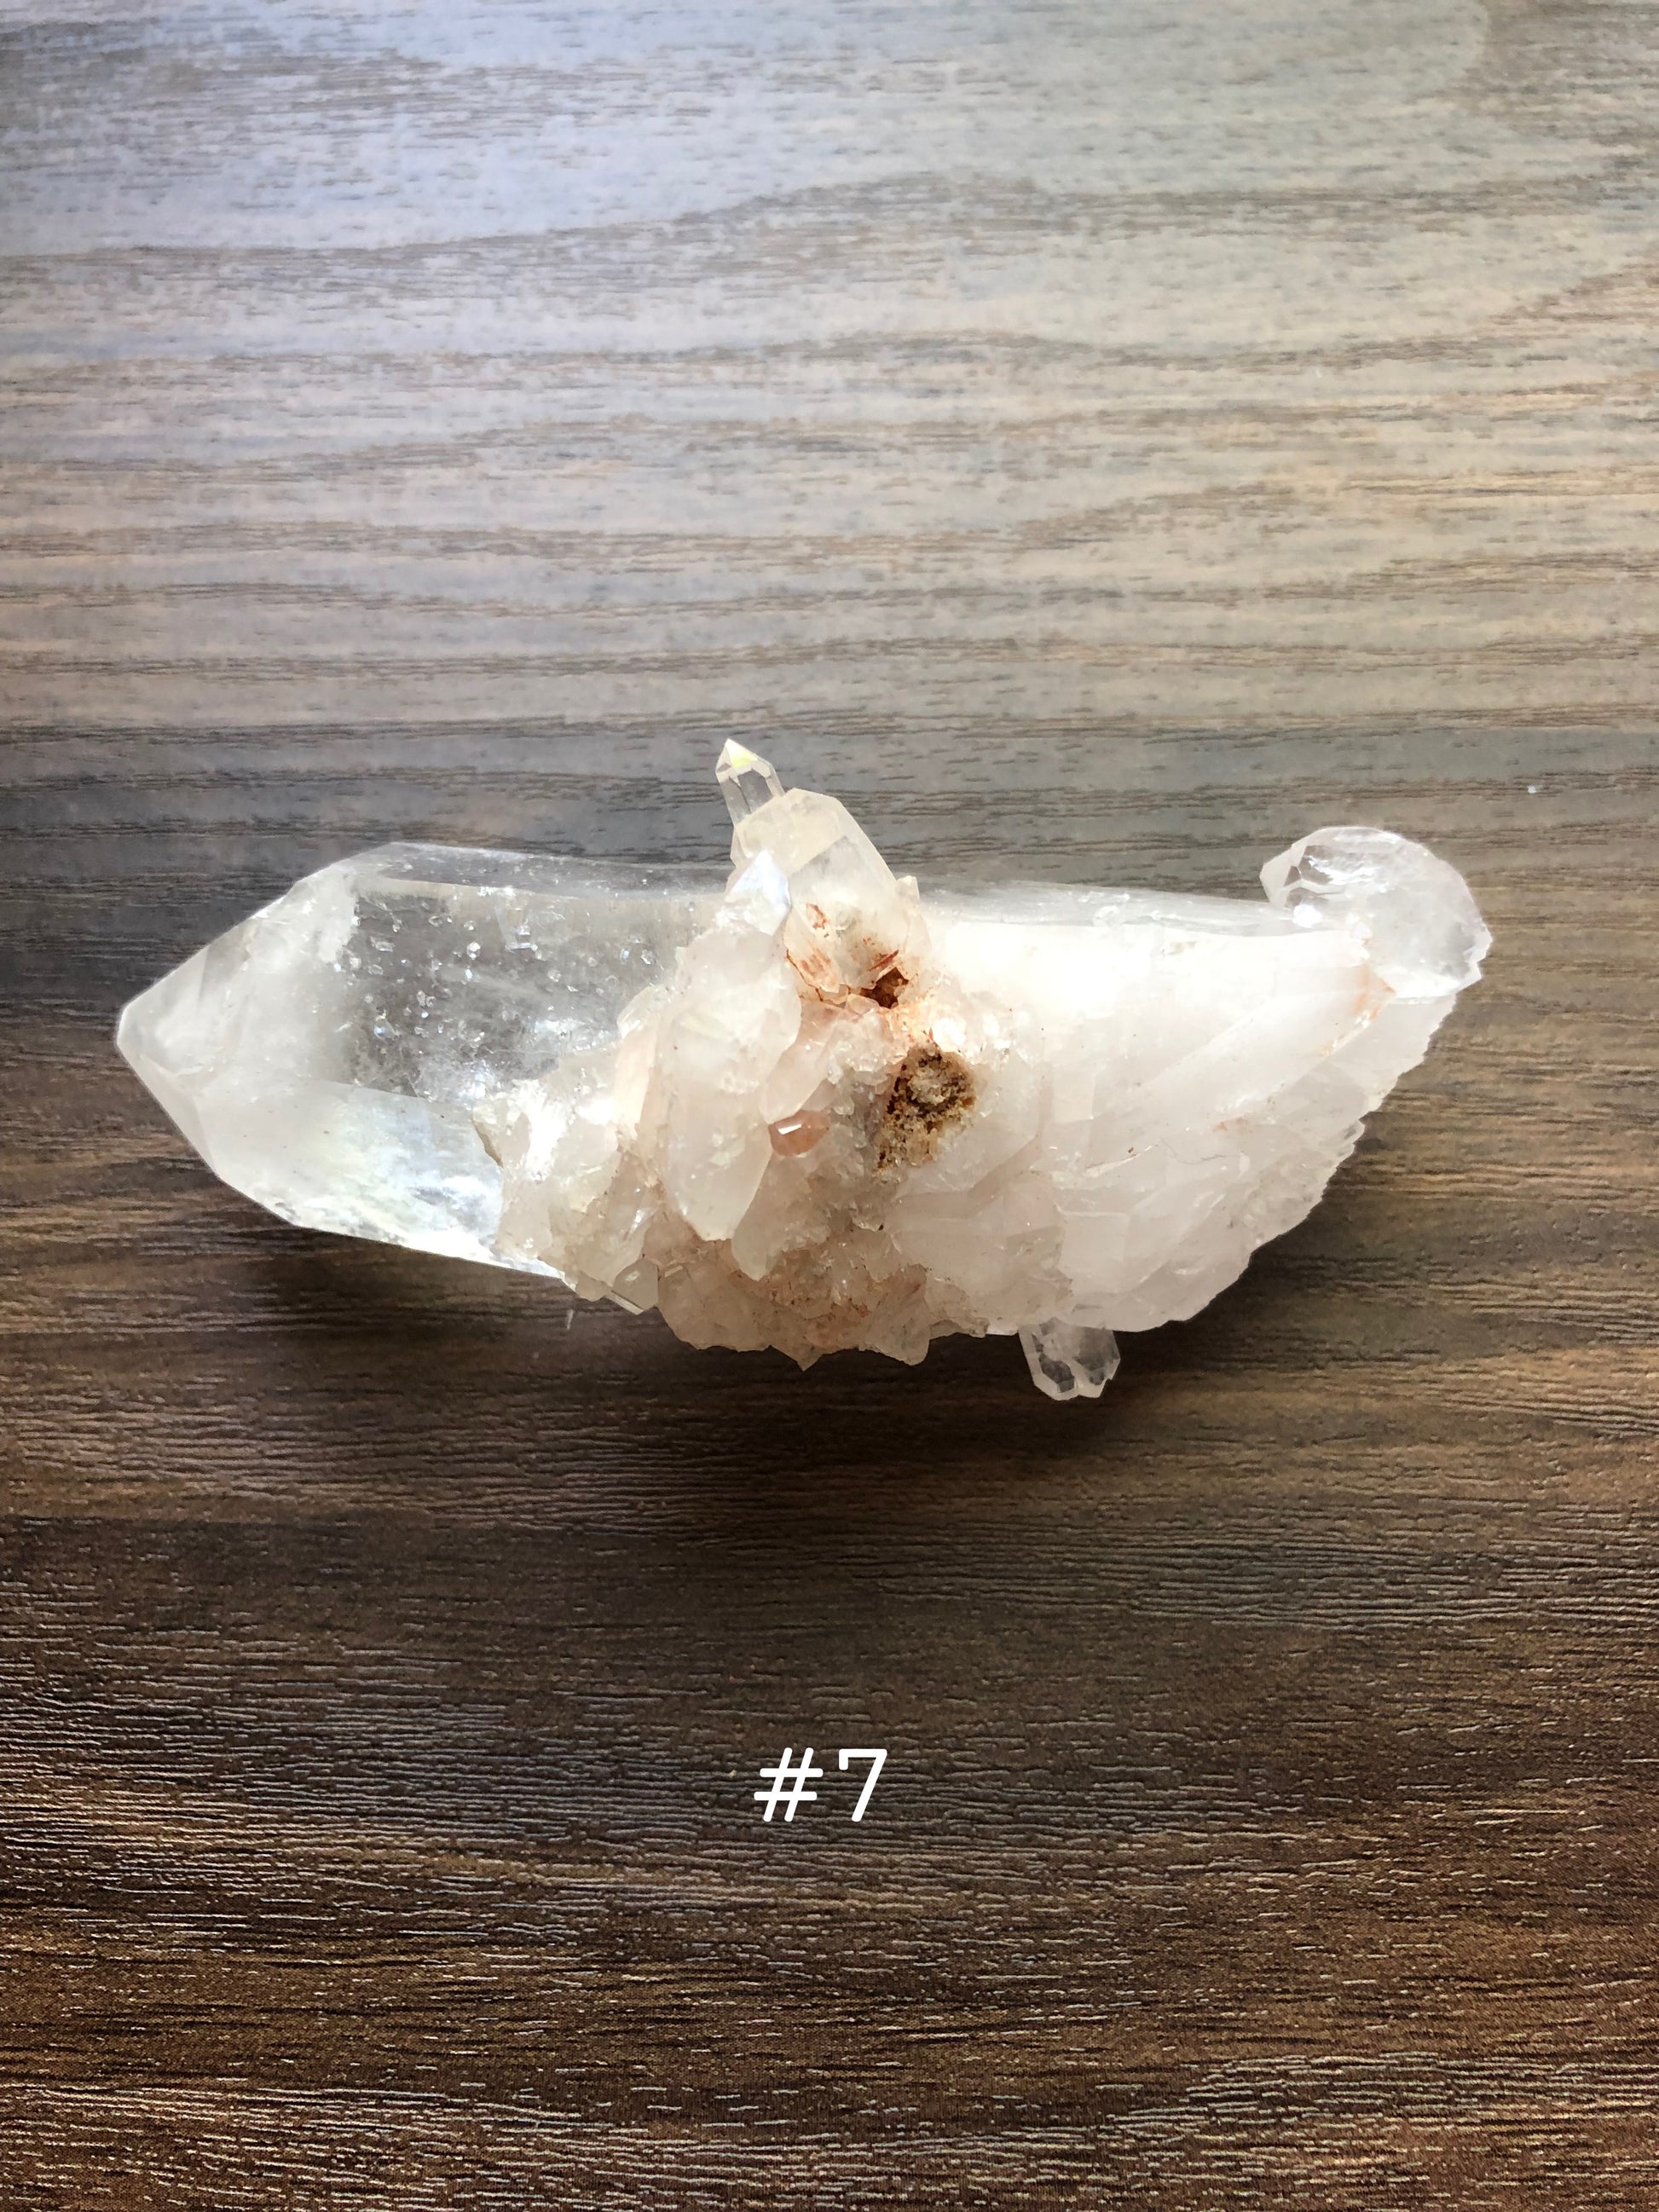 A large, rough cut quartz crystal rests on a wooden surface. It is jagged, with small clusters on it.  The crystal is relatively clear, with the clusters being slightly discolored. The number 7 is shown on the picture.